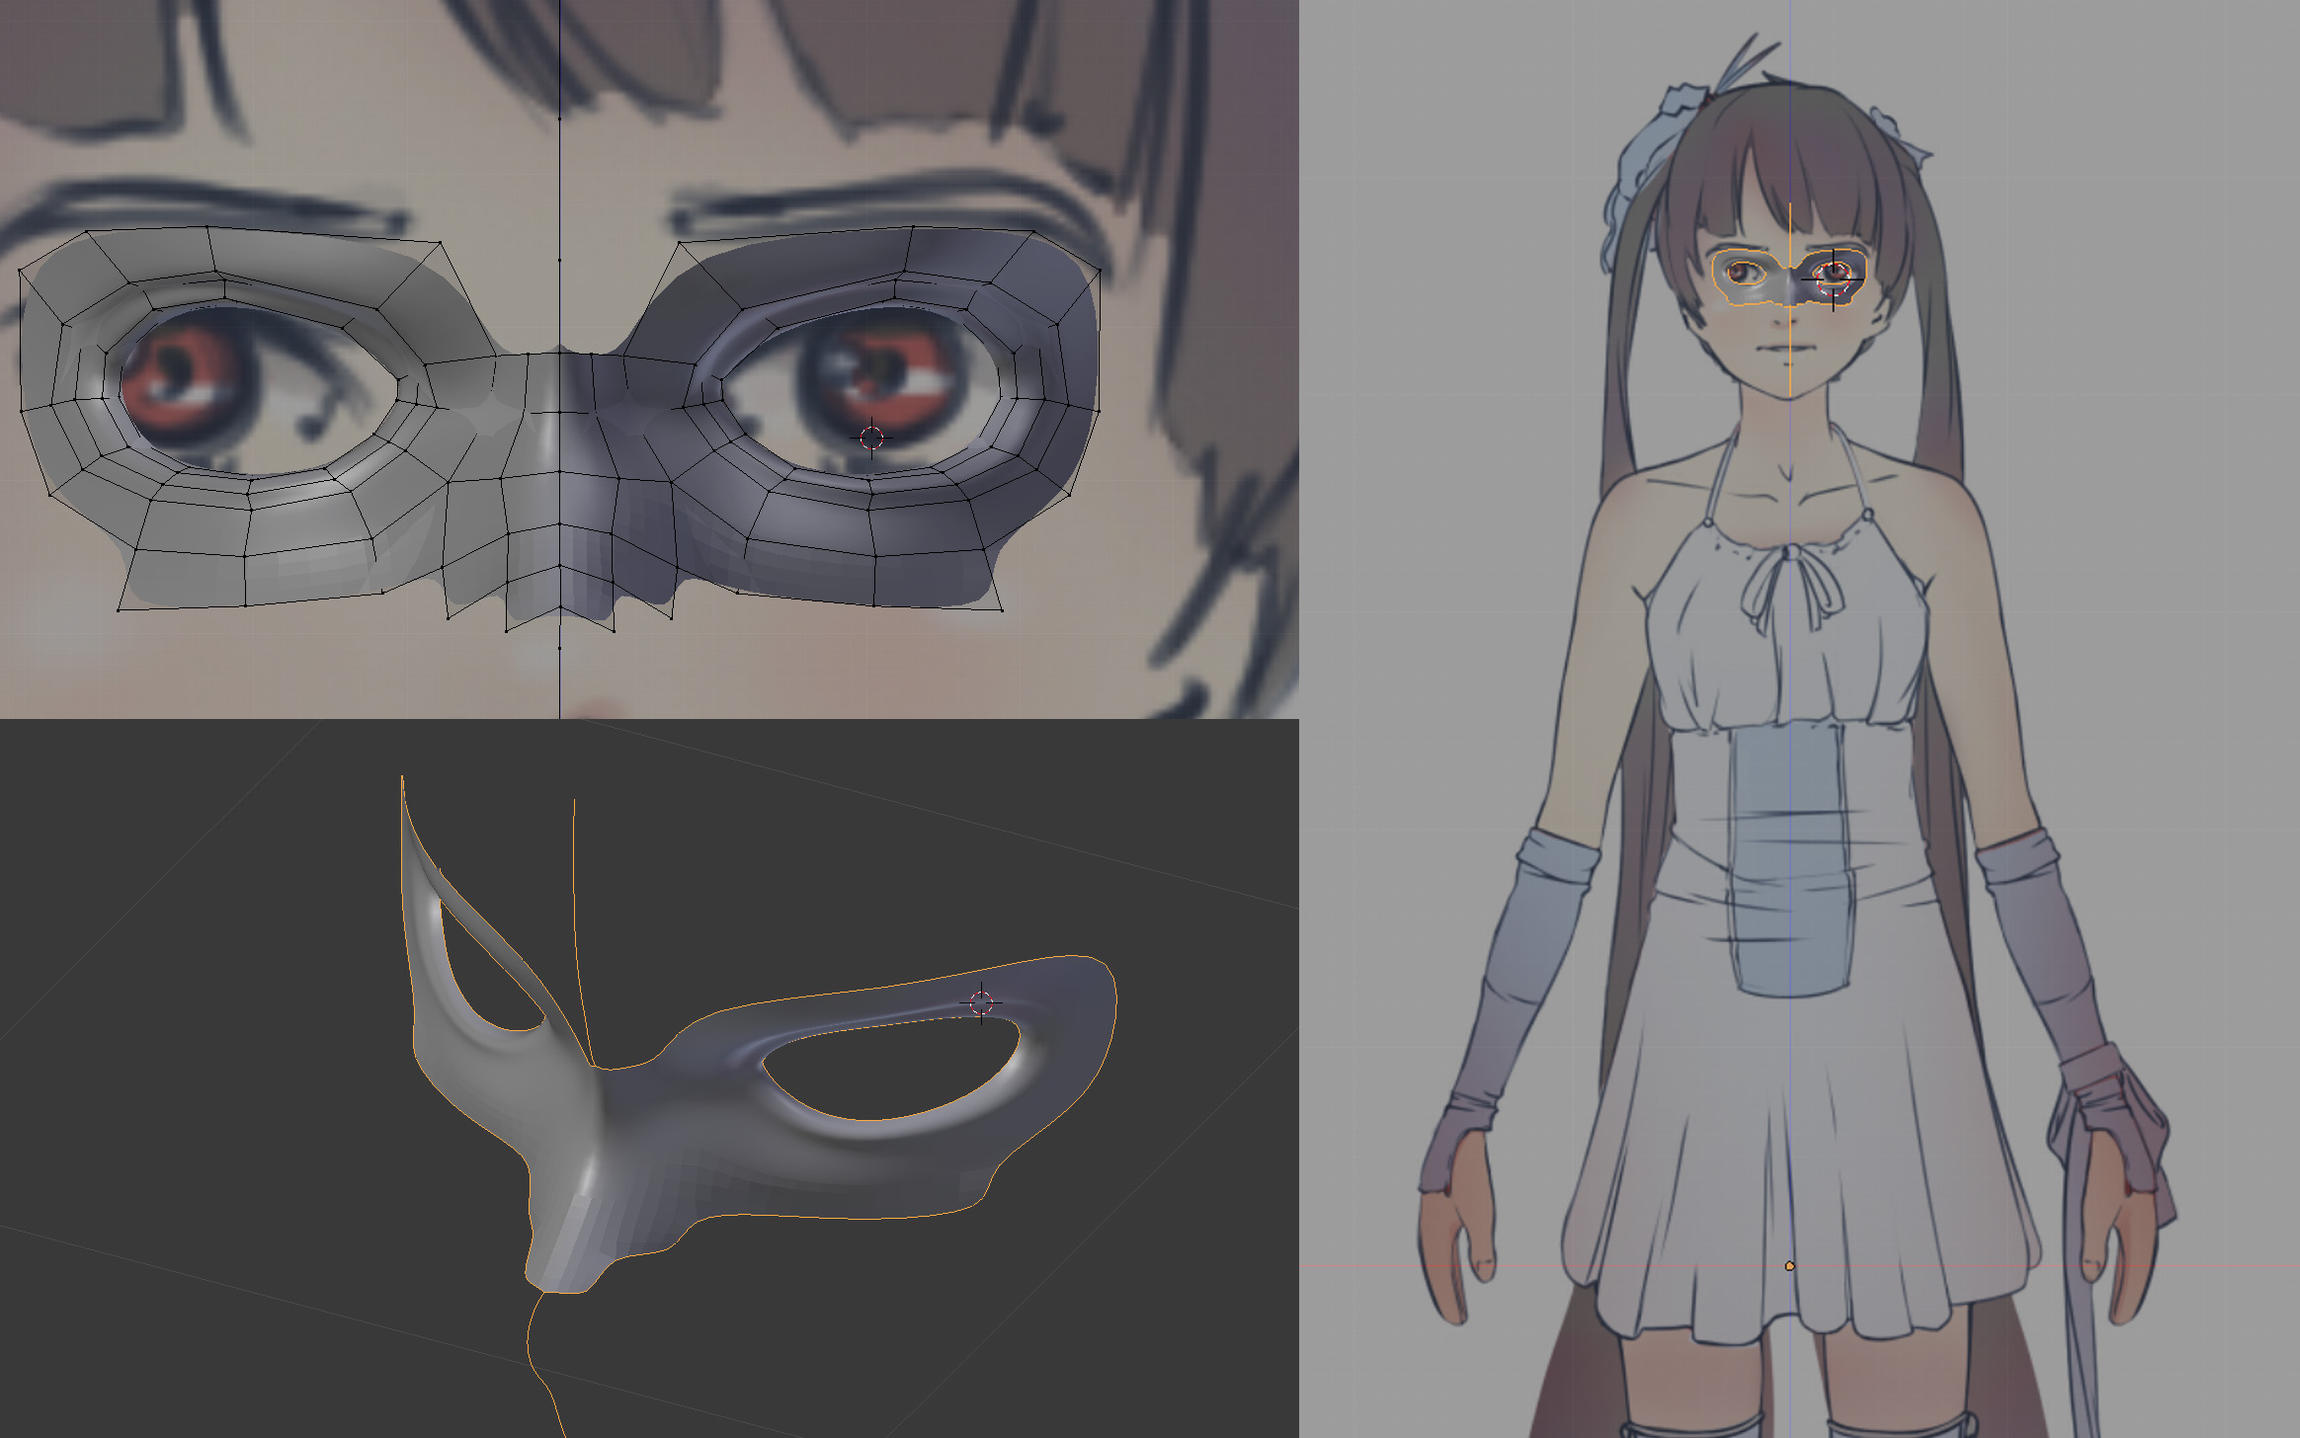 Anime face, what improvement can be made? - Modeling - Blender Artists  Community